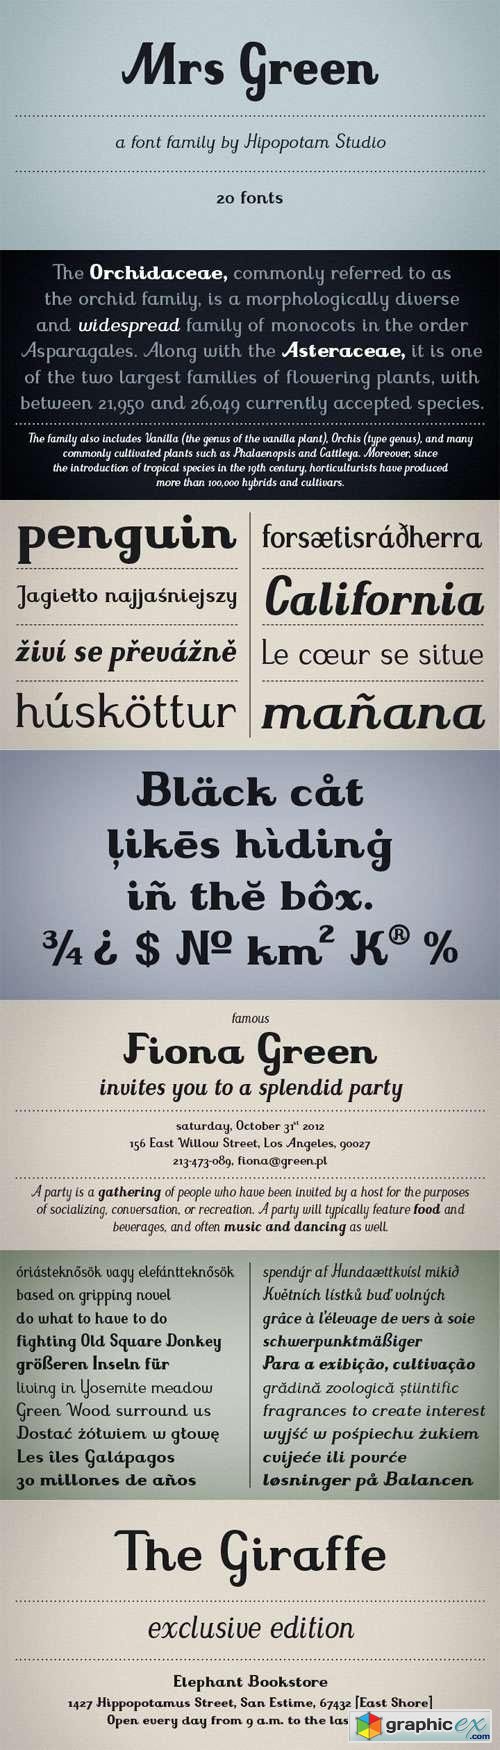 Mrs Green Font Family - 20 Fonts for $240